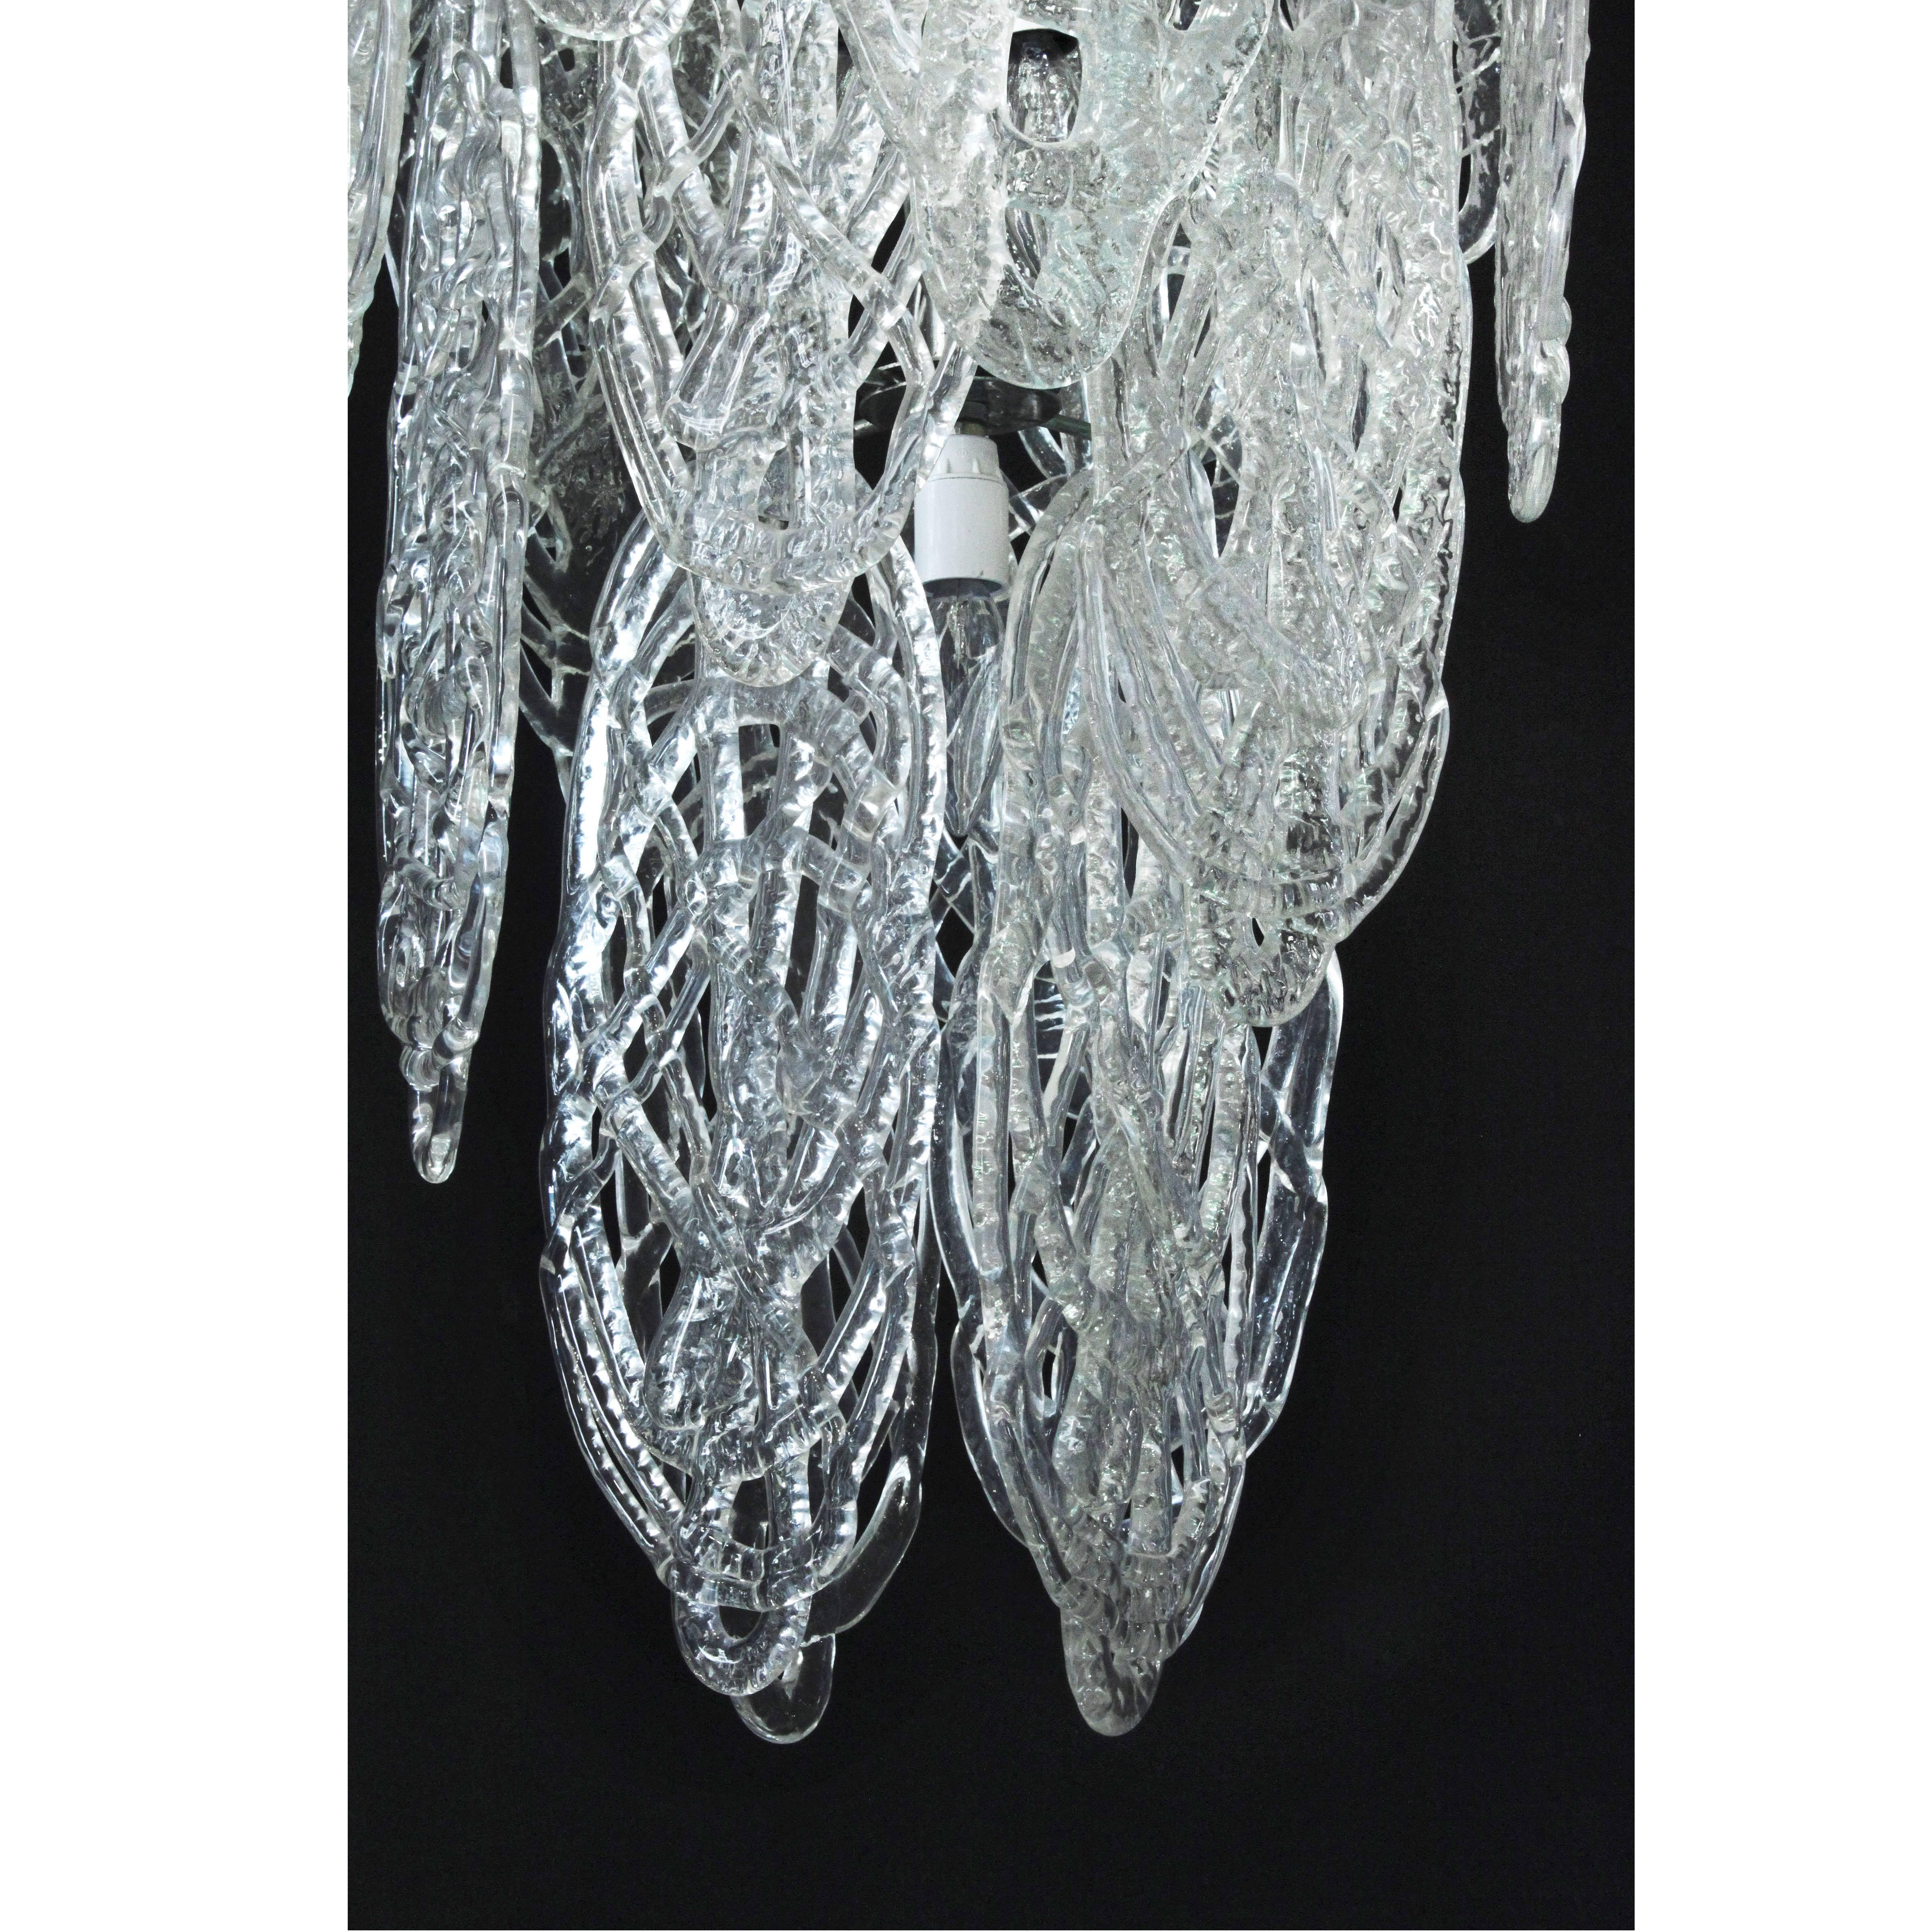 Mid-Century Modern Mazzega Chandelier with Drizzled Glass, 1970s